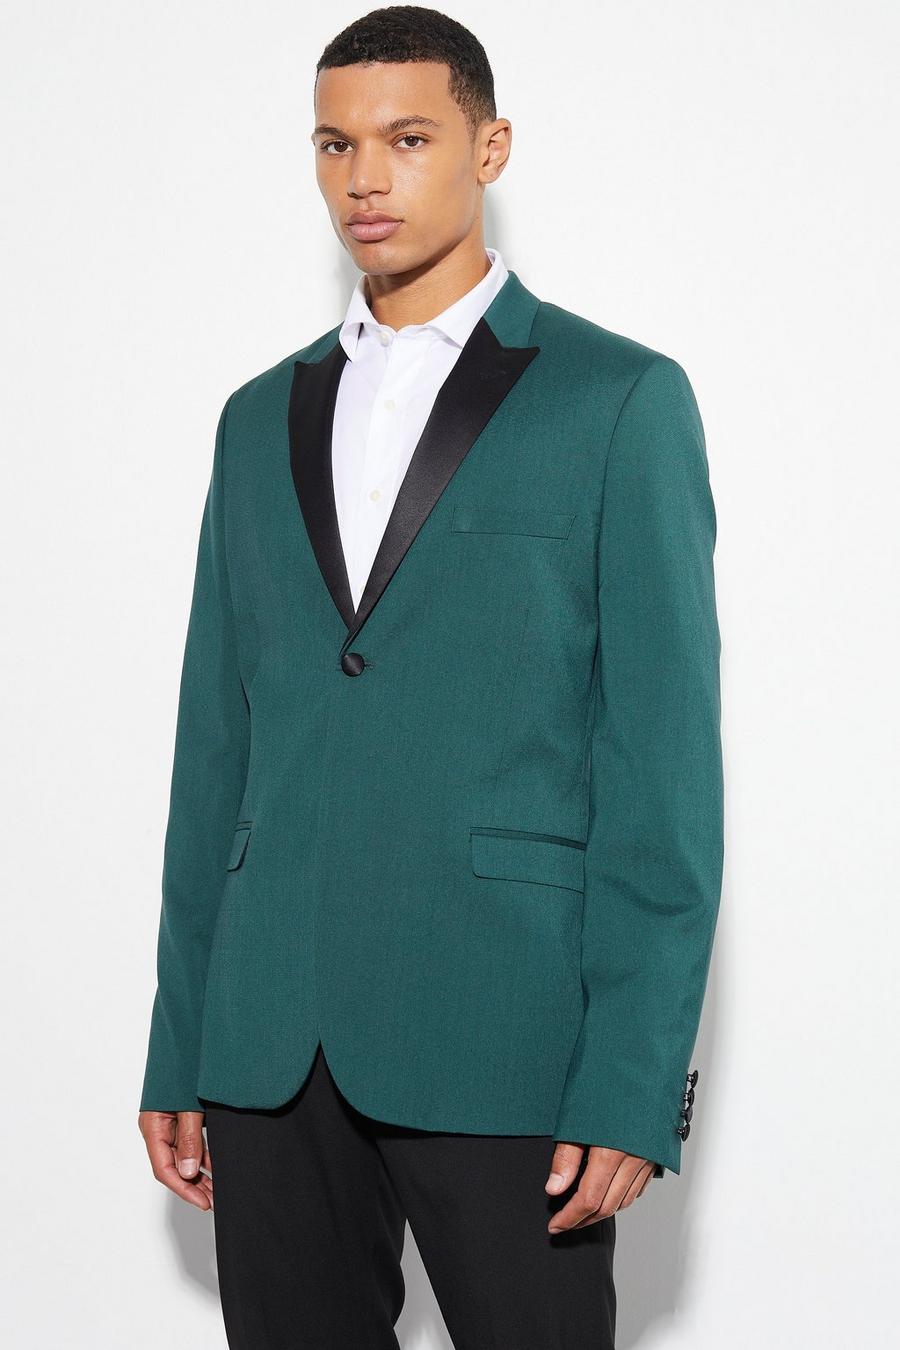 Forest verde Tall Skinny Tuxedo Single Breasted Suit Jacket